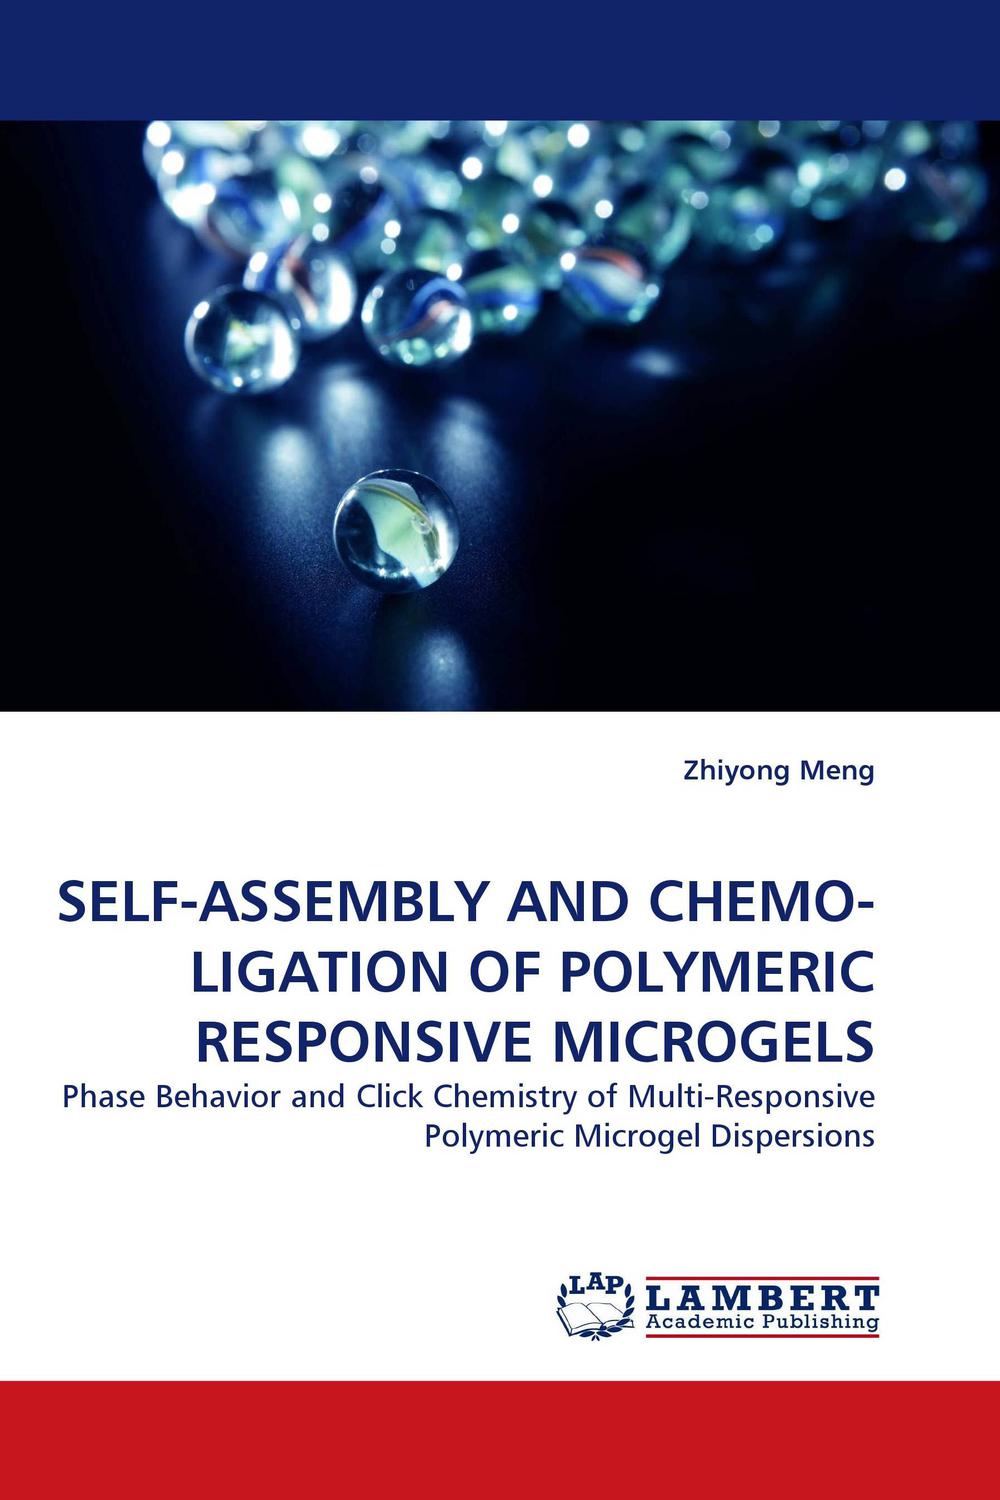 SELF-ASSEMBLY AND CHEMO-LIGATION OF POLYMERIC RESPONSIVE MICROGELS - Zhiyong Meng,,